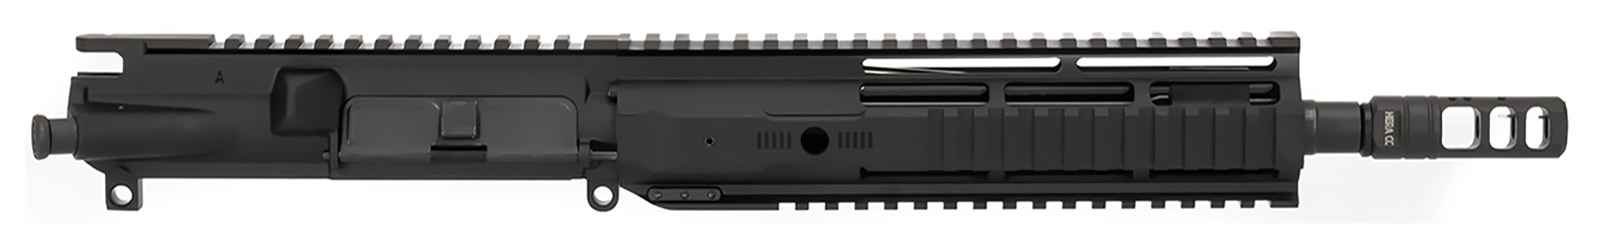 ar 15 upper assembly 10 5 223 5 56 1 7 hera competition compensator 9 hera arms irs handguard rail